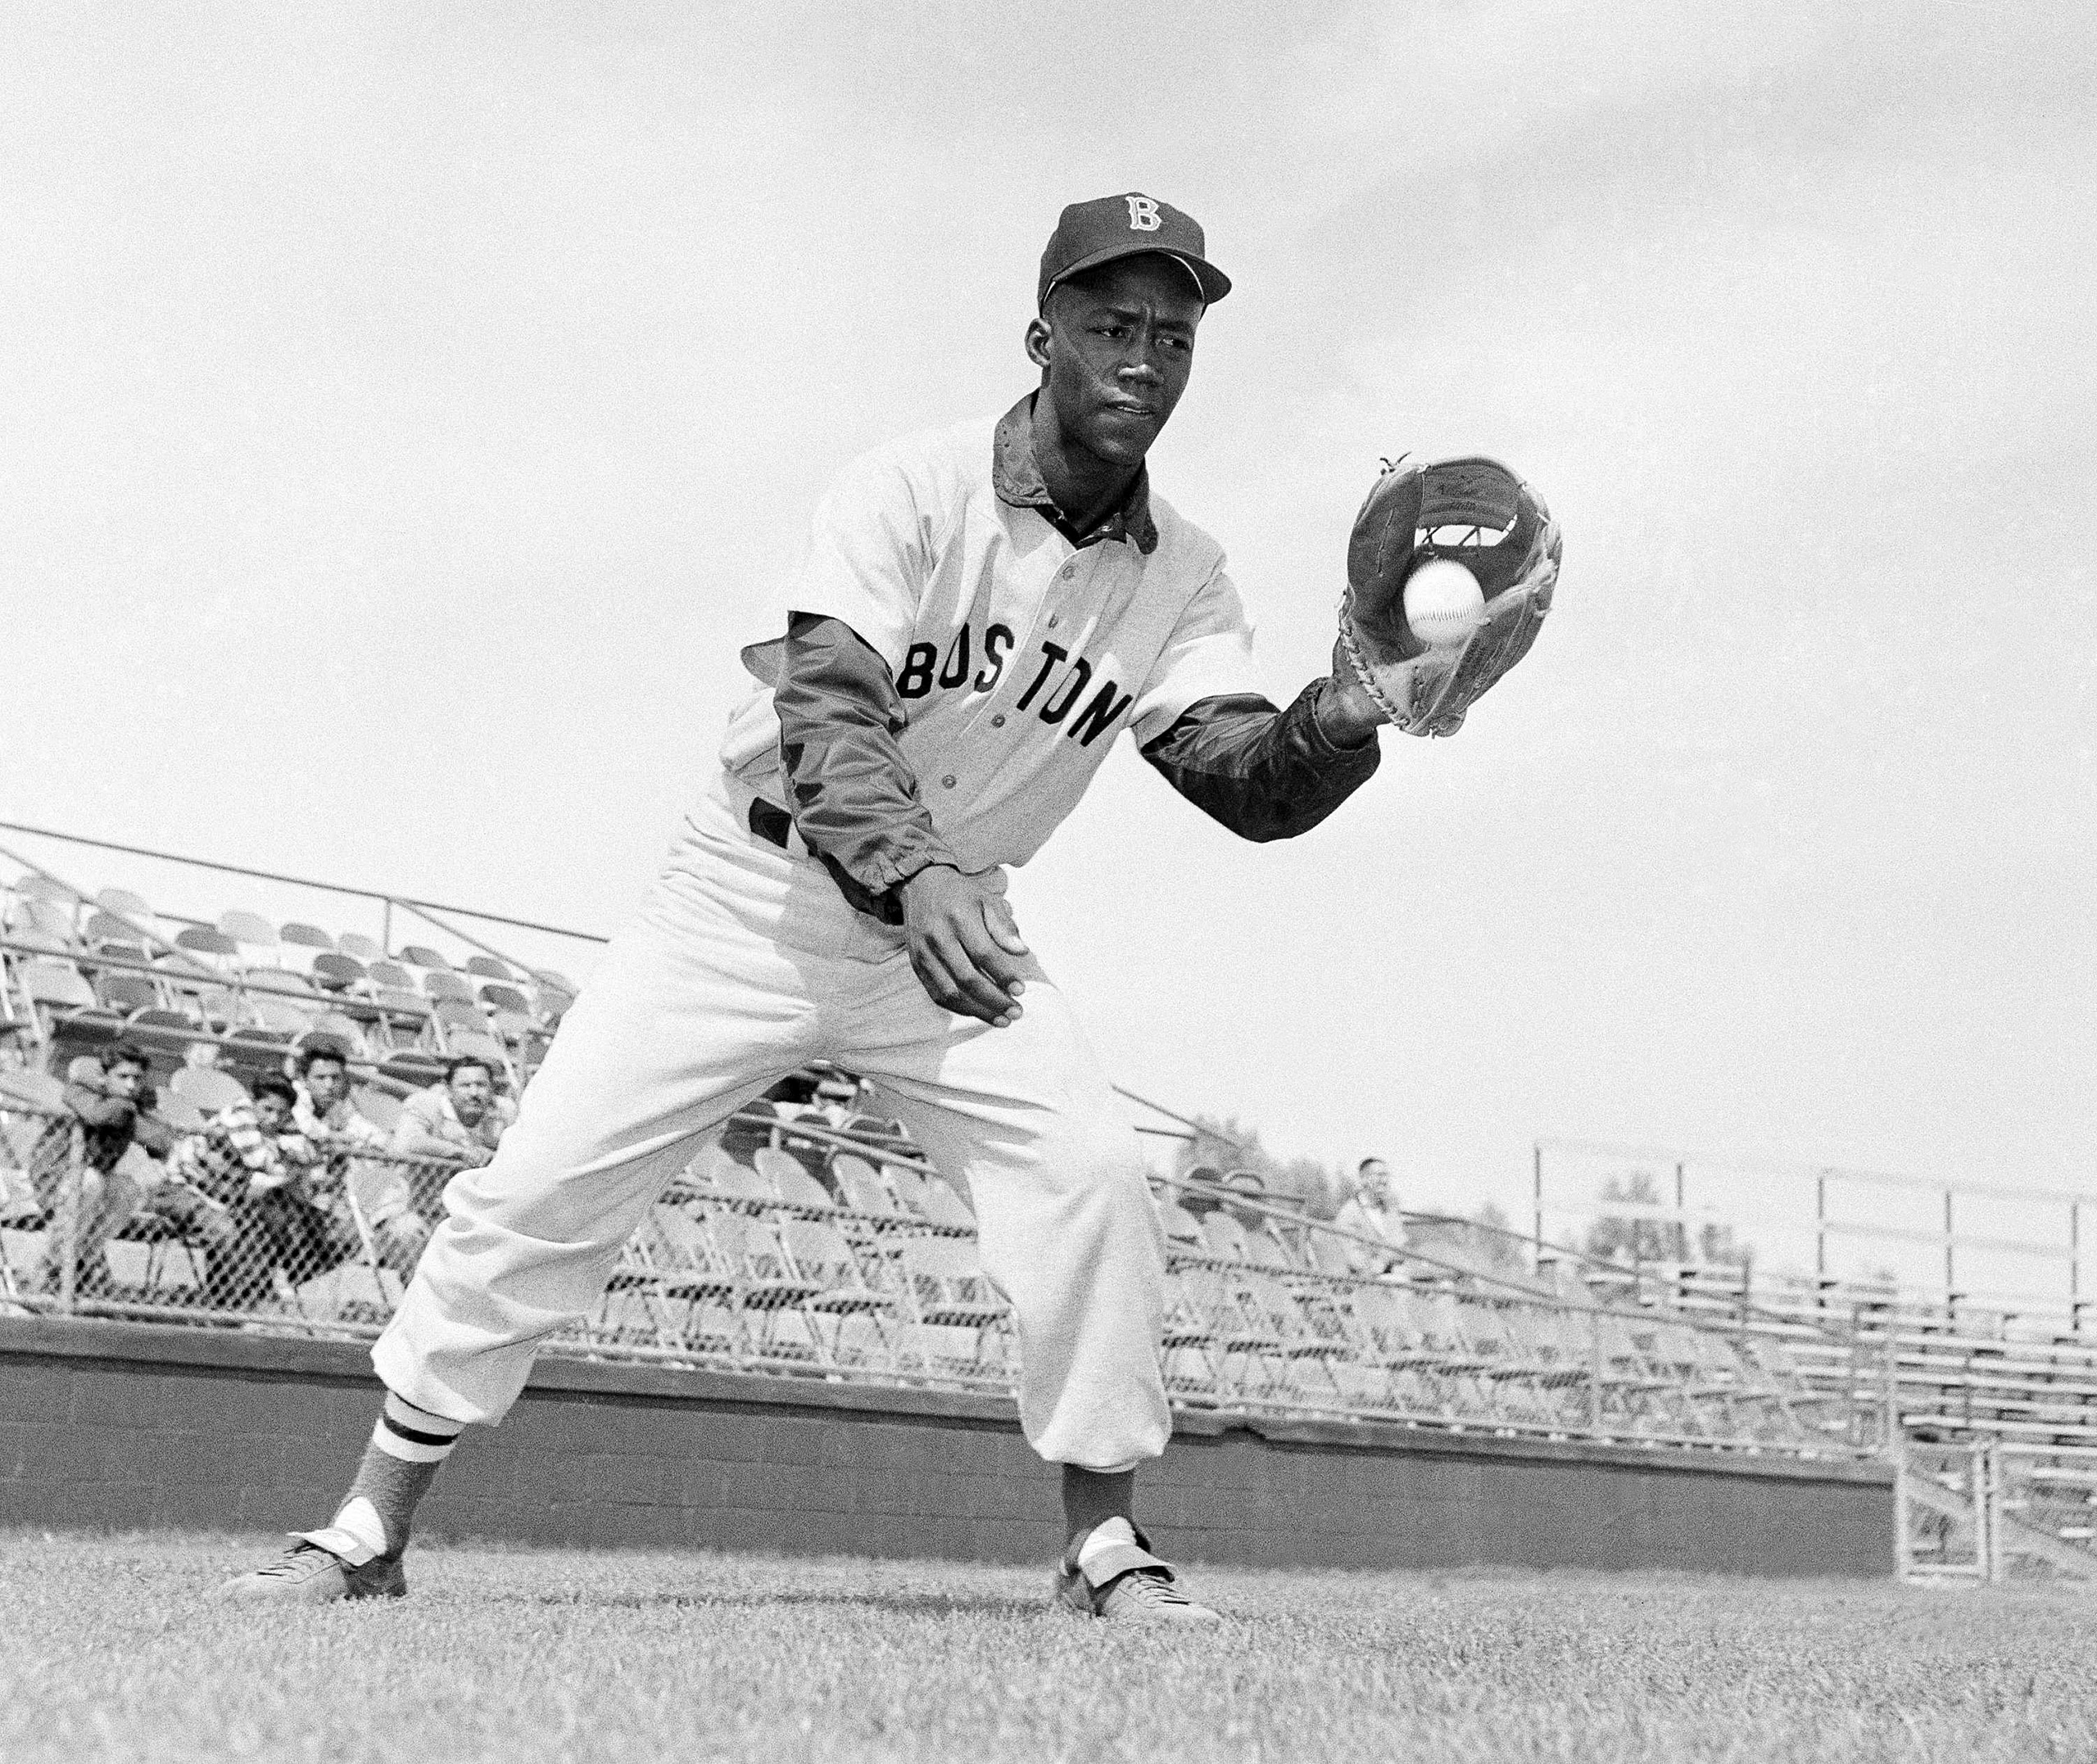 Elijah "Pumpsie" Green, of the Boston Red Sox, shown in action, April 20, 1959. Green was the first black player on the Red Sox. (Harold Filan—AP Photo)